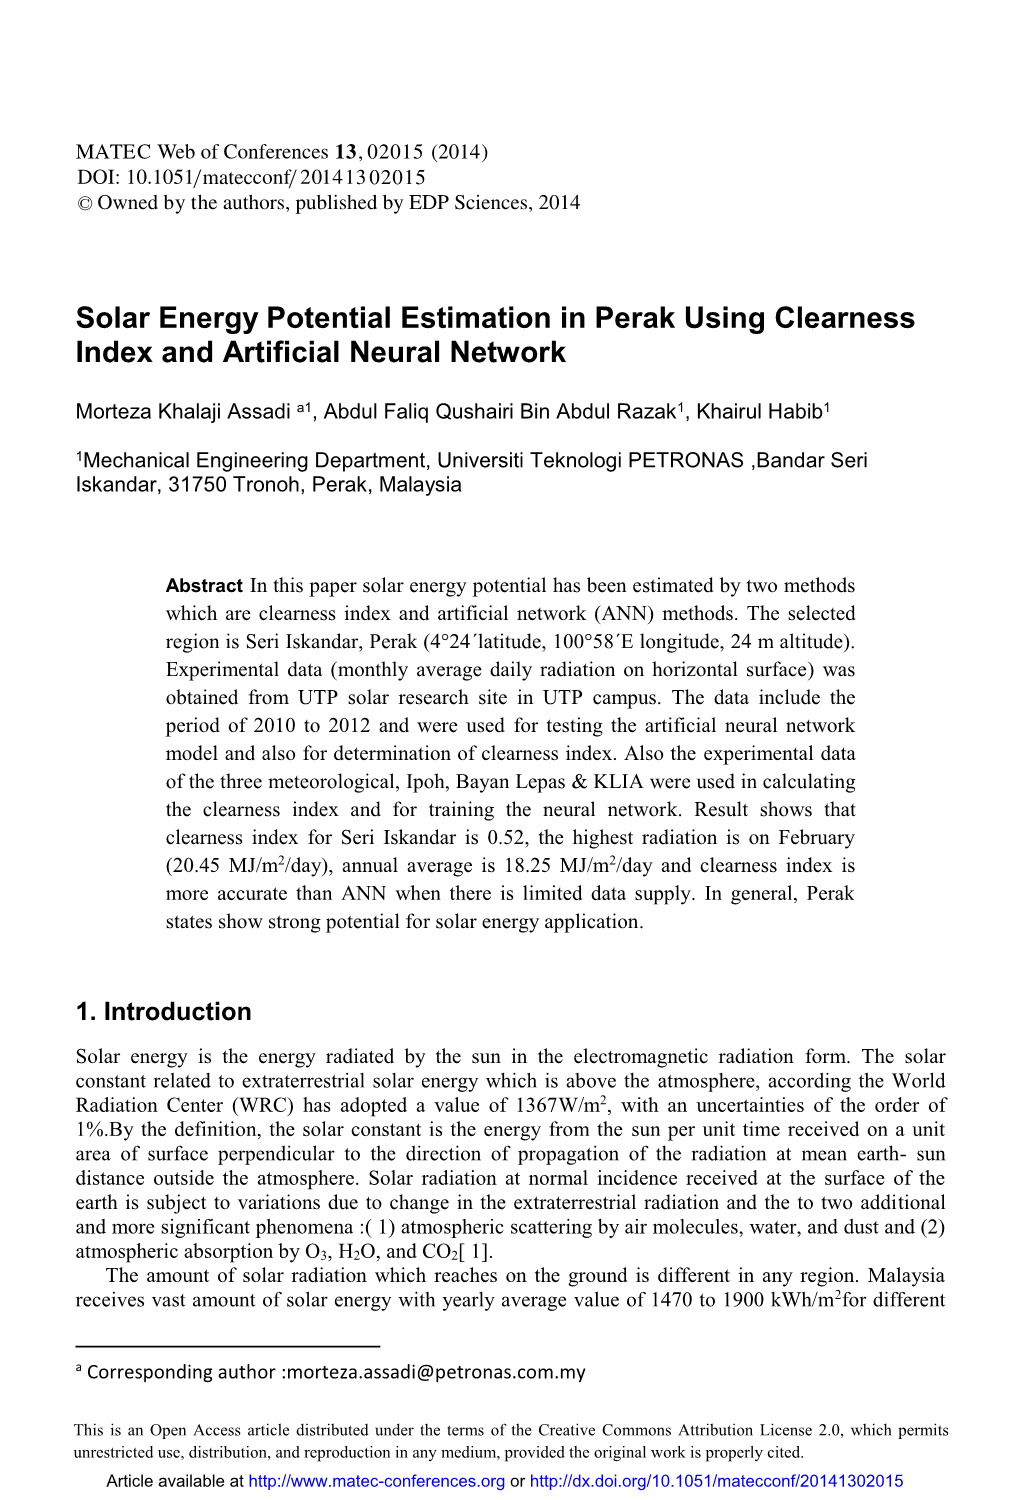 Solar Energy Potential Estimation in Perak Using Clearness Index and Artificial Neural Network